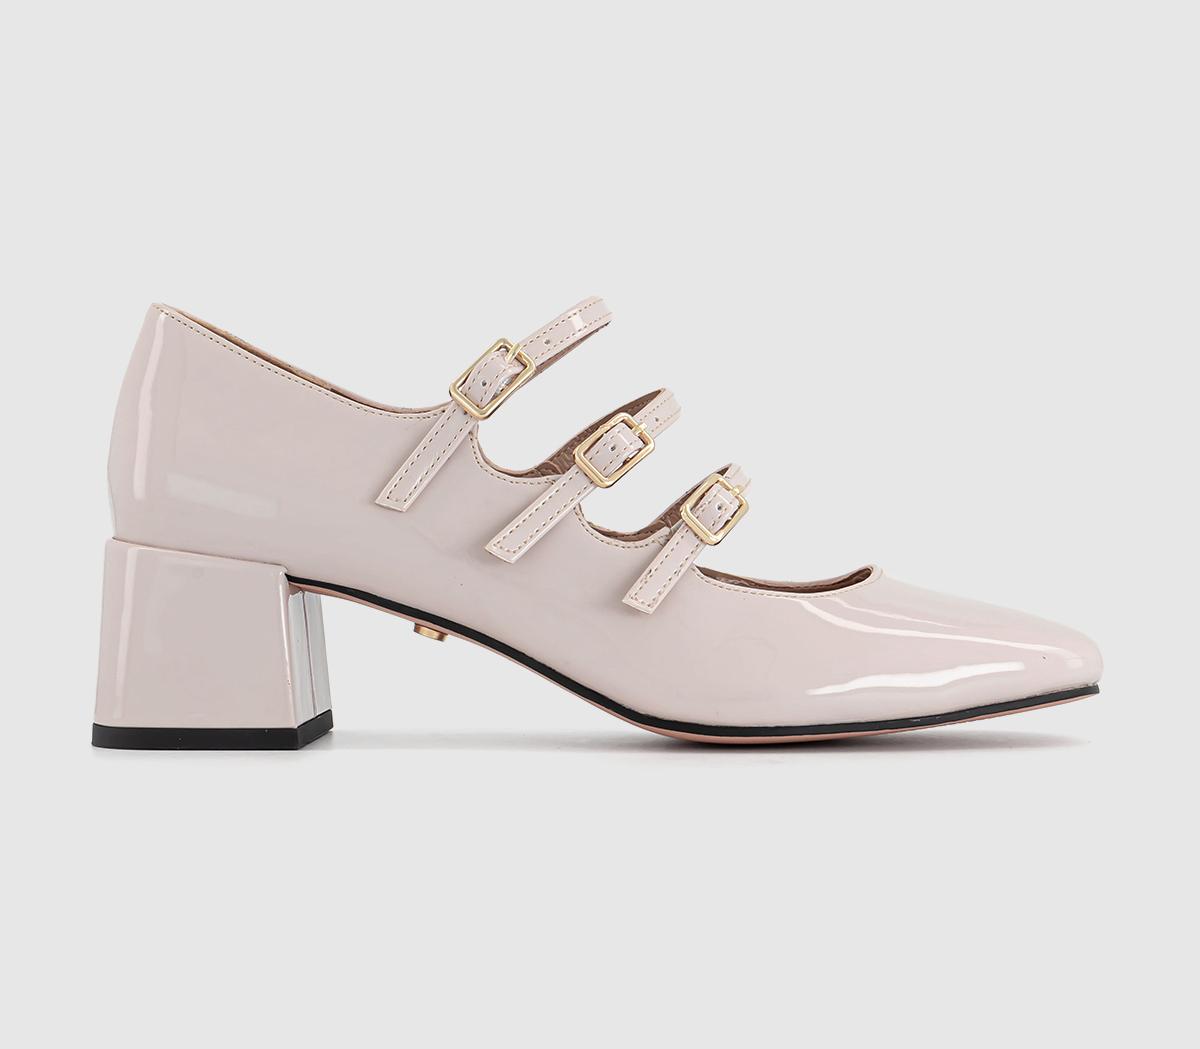 OFFICEMarvellous Triple Stap Mary Jane Block HeelsOff White Patent